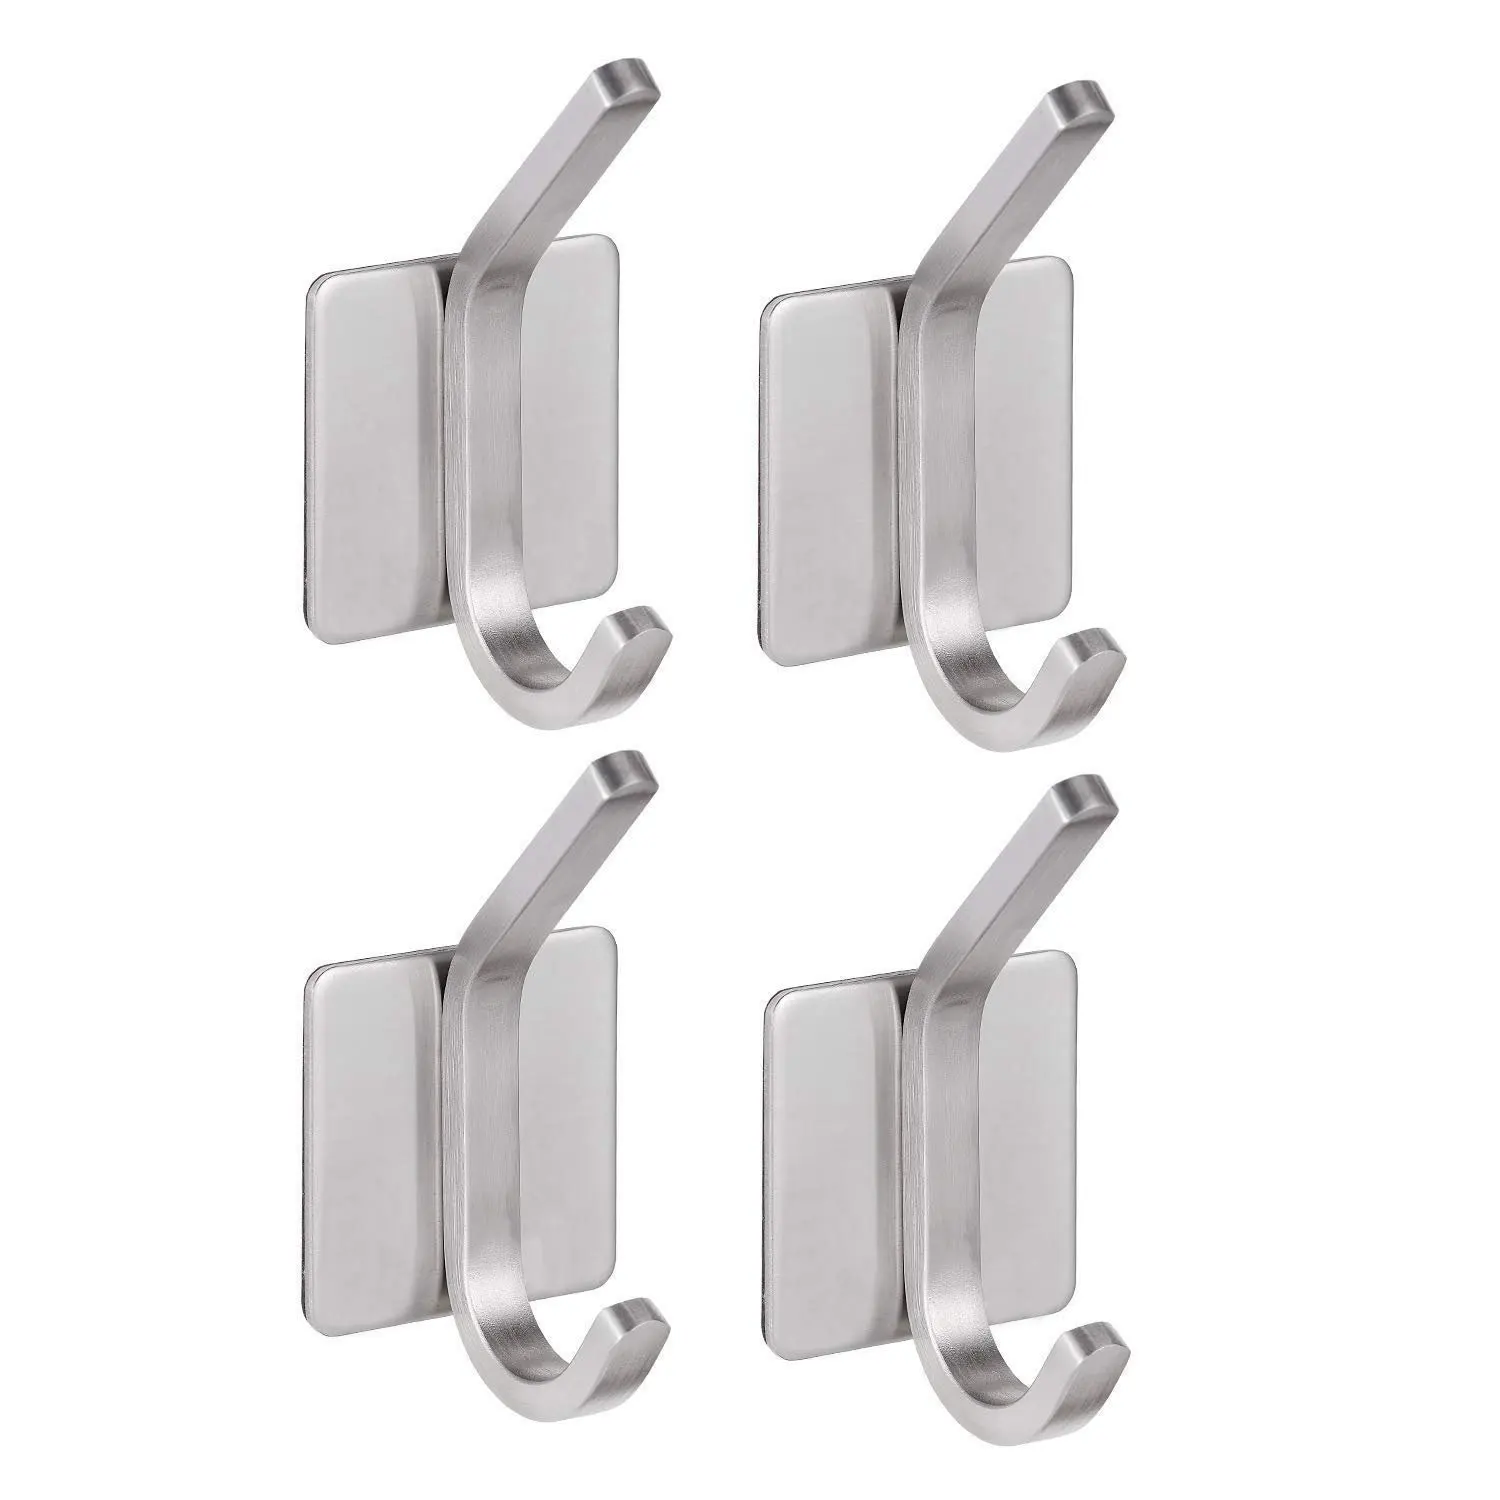 4 Pack of Self Adhesive Hooks Hat Towel Robe Coat Stick-up Stainless Steel Hanger for Kitchen Bathrooms Lavatory Closets Max 3KG | Дом и сад